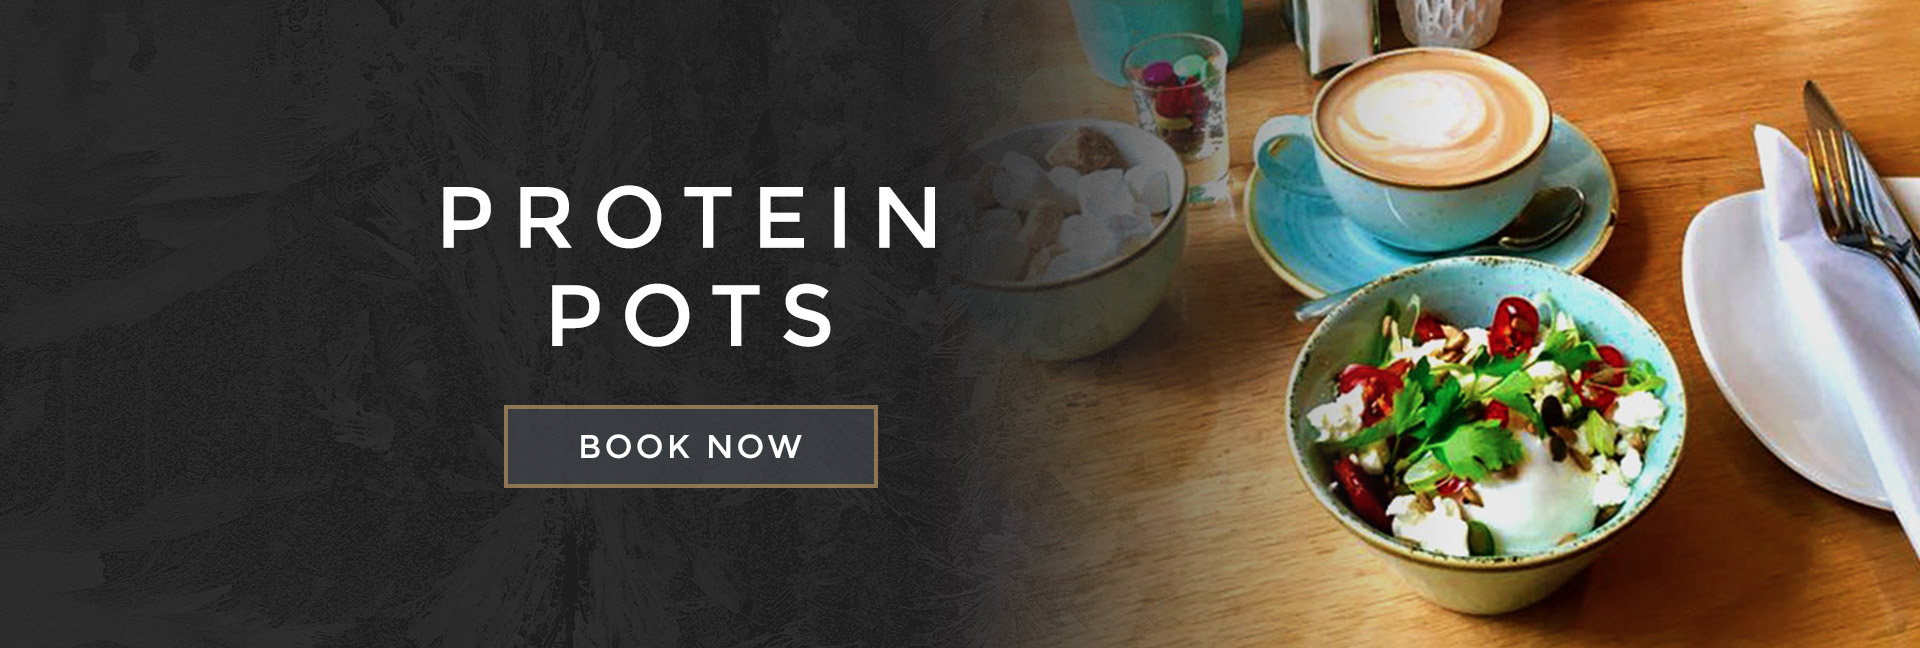 Protein pots at All Bar One Regent Street - Book your table